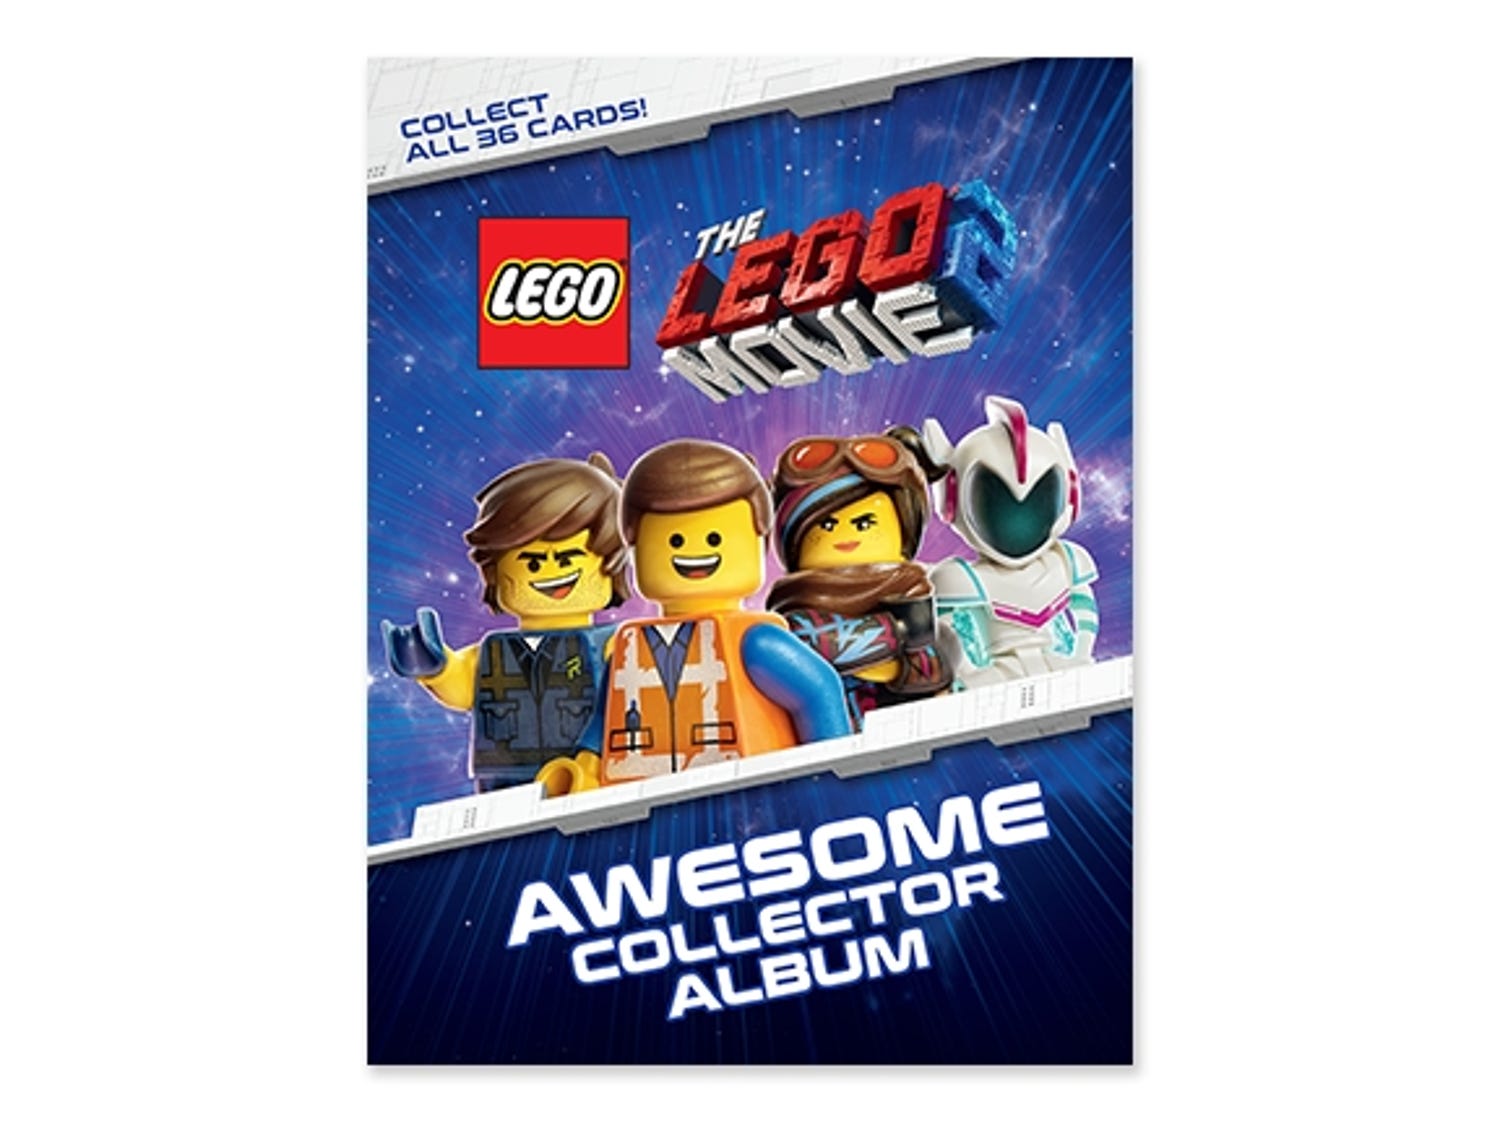 THE LEGO® MOVIE 2™ Collector Album and Trading Card